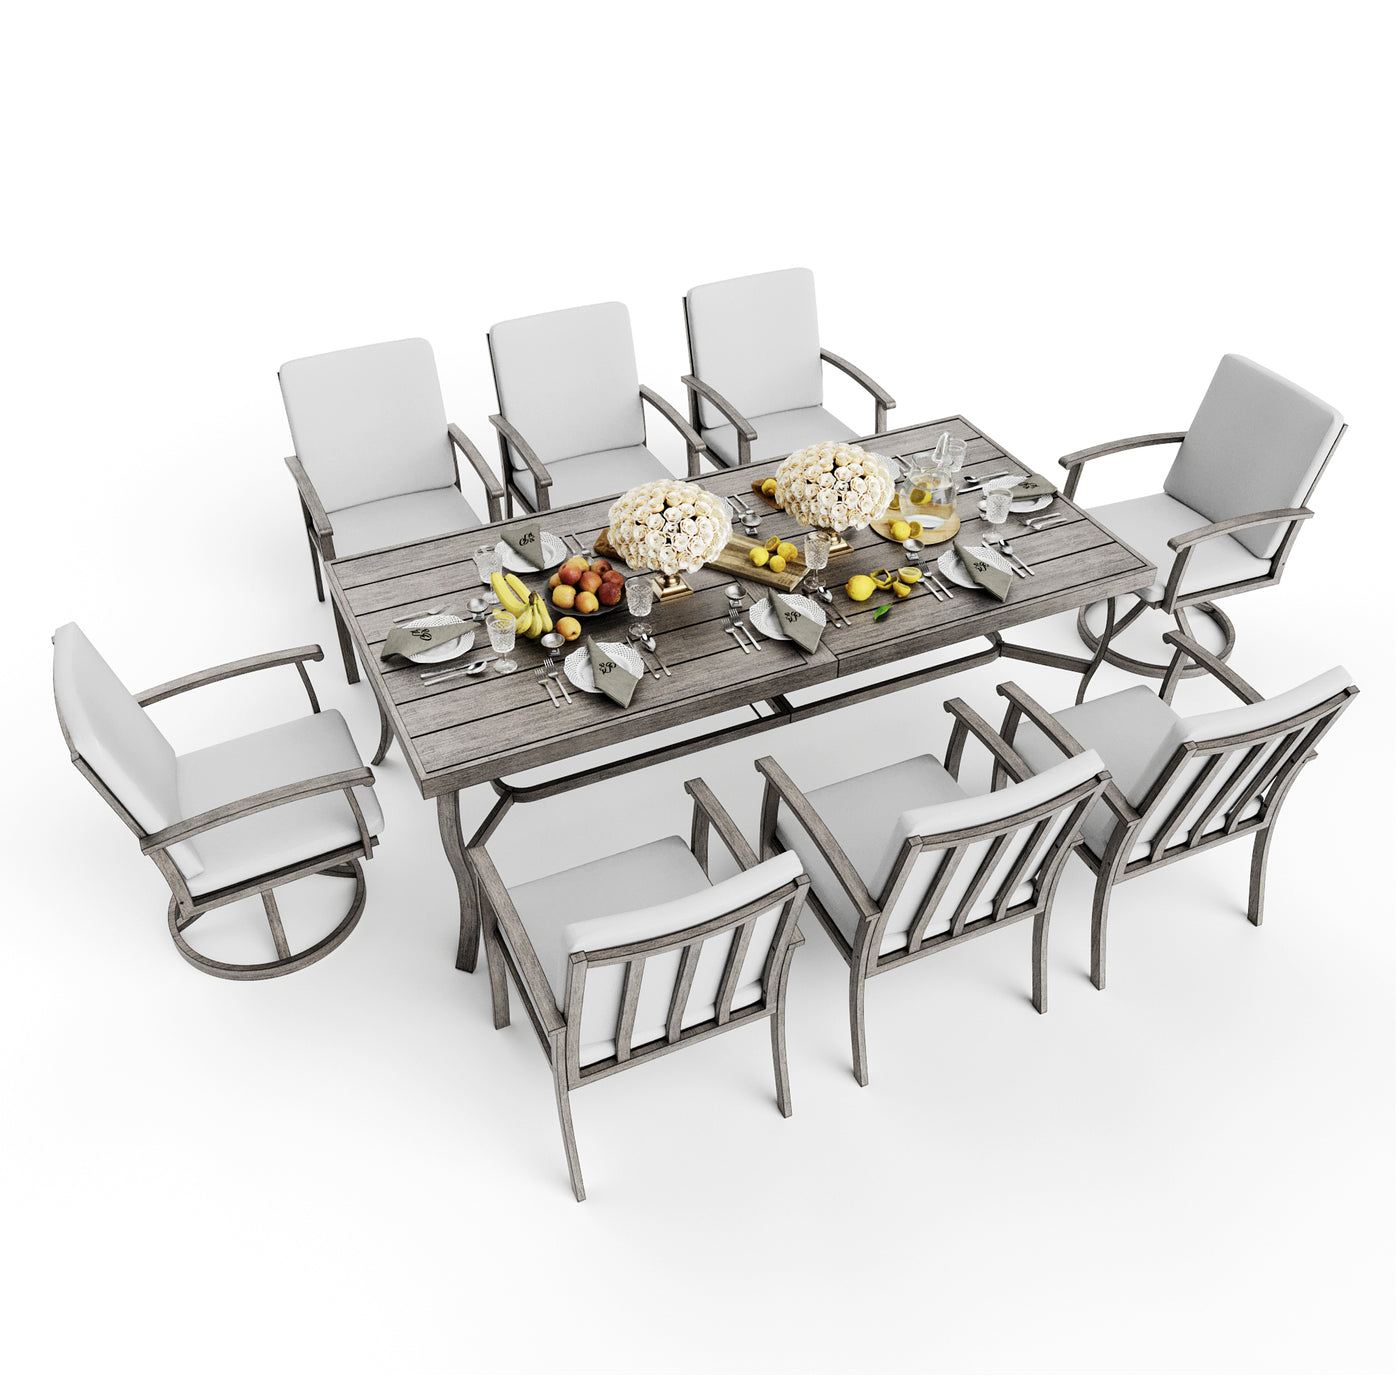 HAPPATIO 9 Piece Patio Dining Set, Aluminum Outdoor Dining Set, Aluminum Dining Table and Chairs Set, Patio Dining Furniture with Aluminum Table, Chairs and Washable Cushions